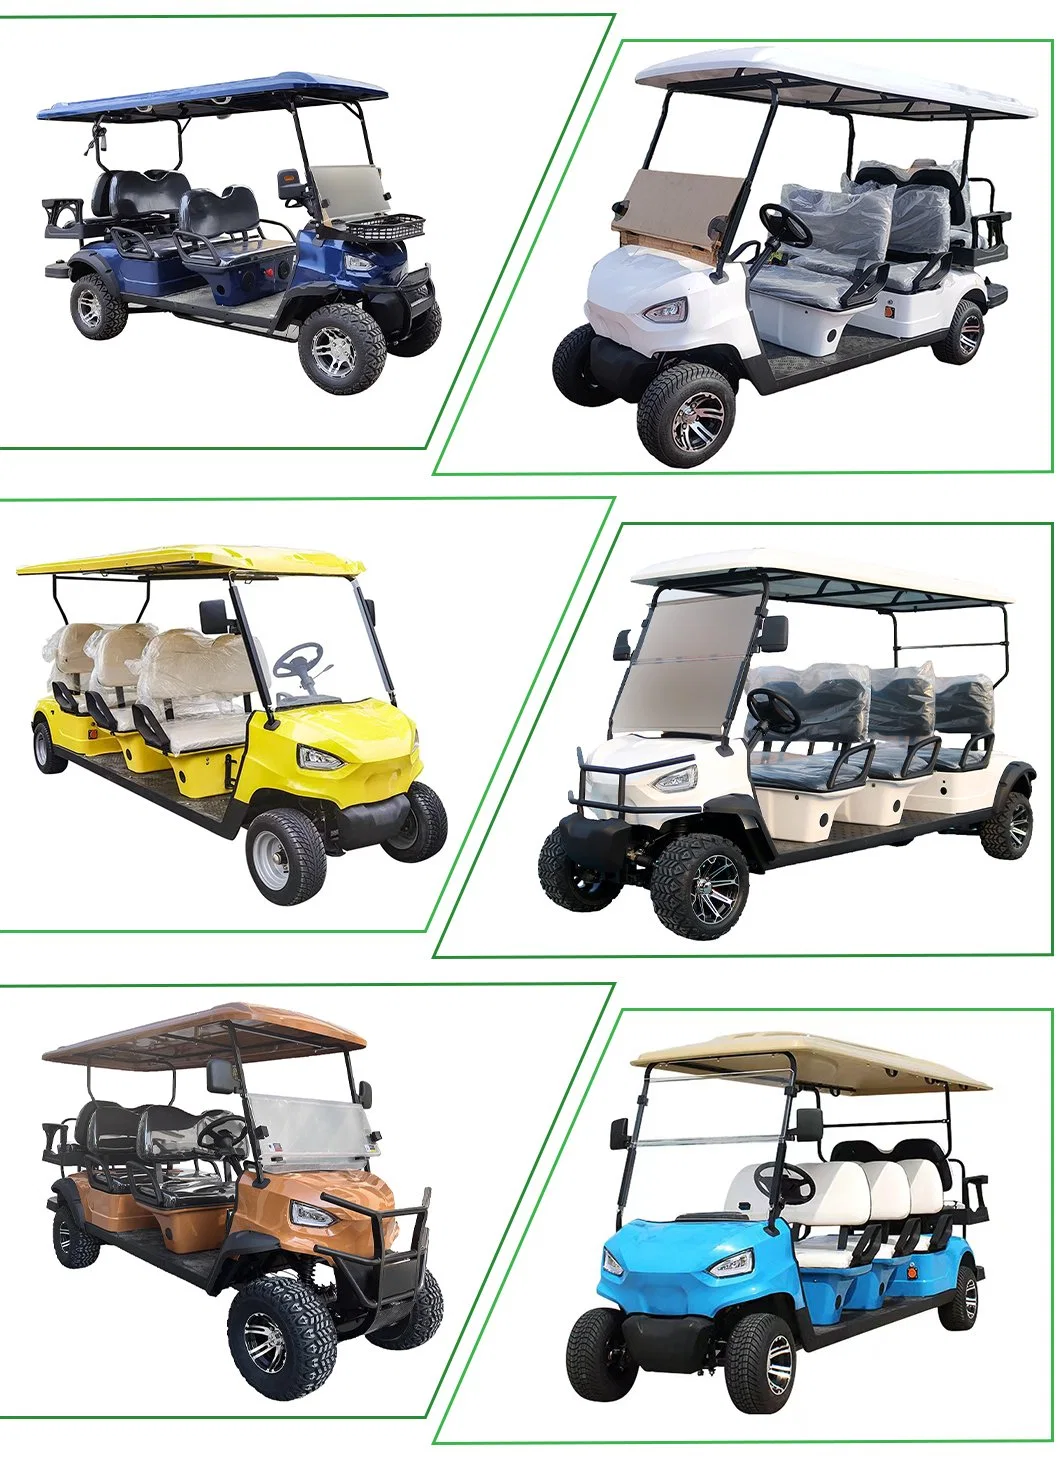 Multifunctional Resort 6 Person Electric Sightseeing Golf Cart